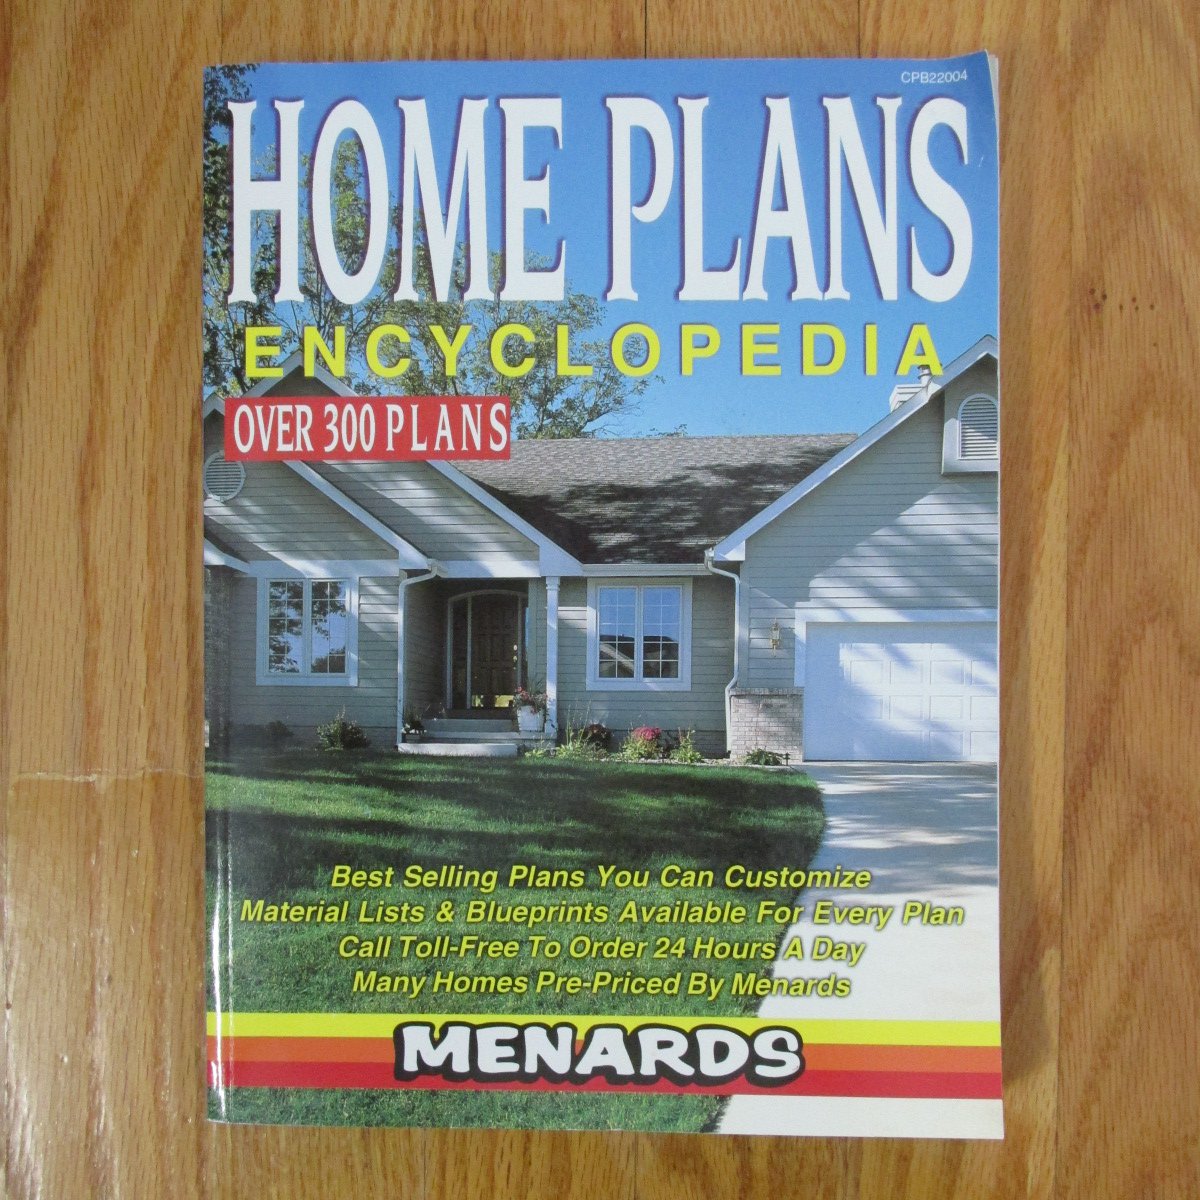 Menards House Plans Affordable Home Designs for Every Budget